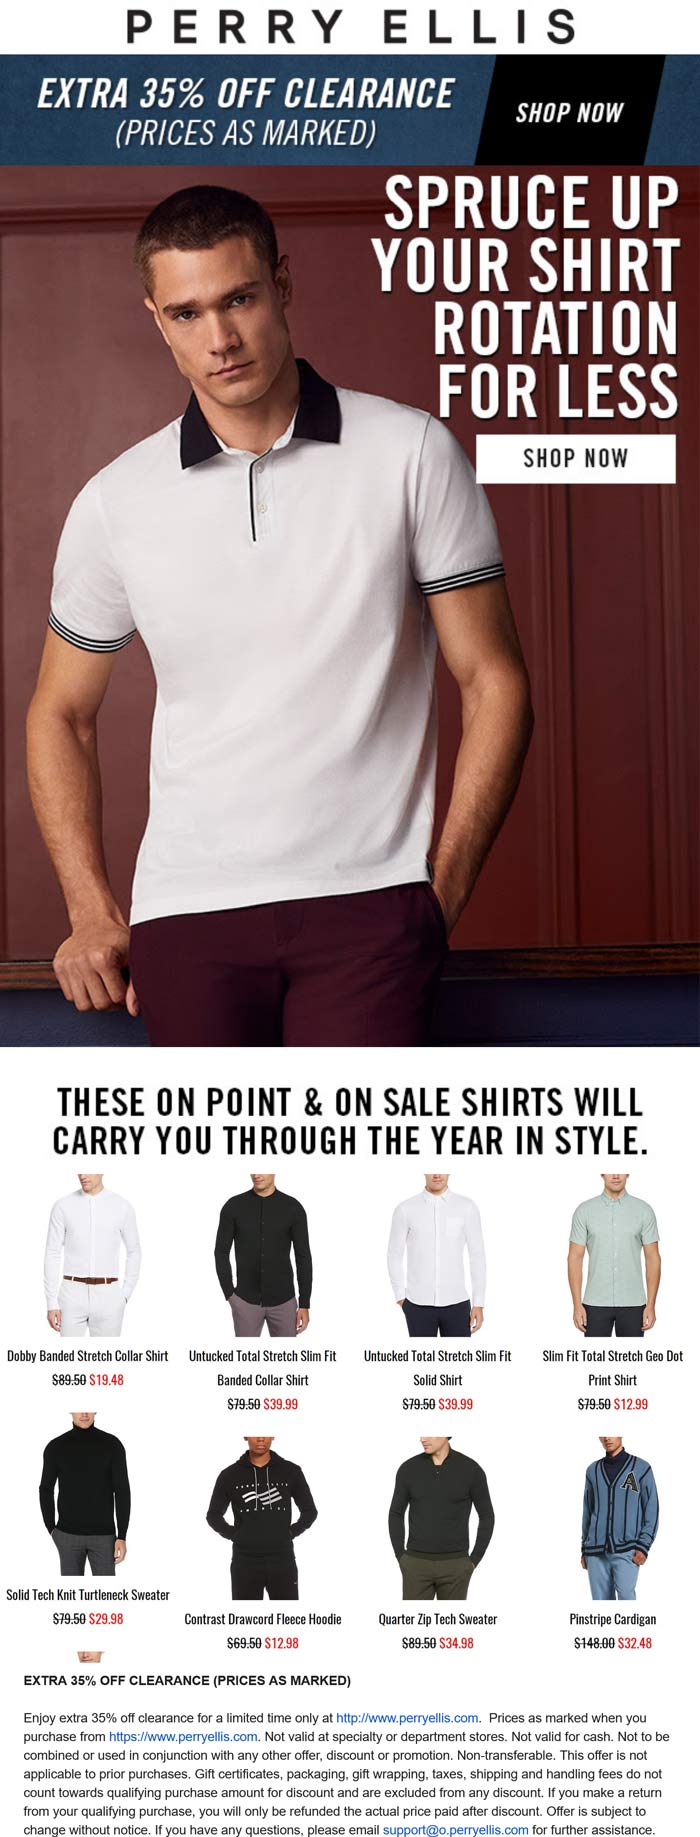 Perry Ellis stores Coupon  Extra 35% off clearance at Perry Ellis #perryellis 